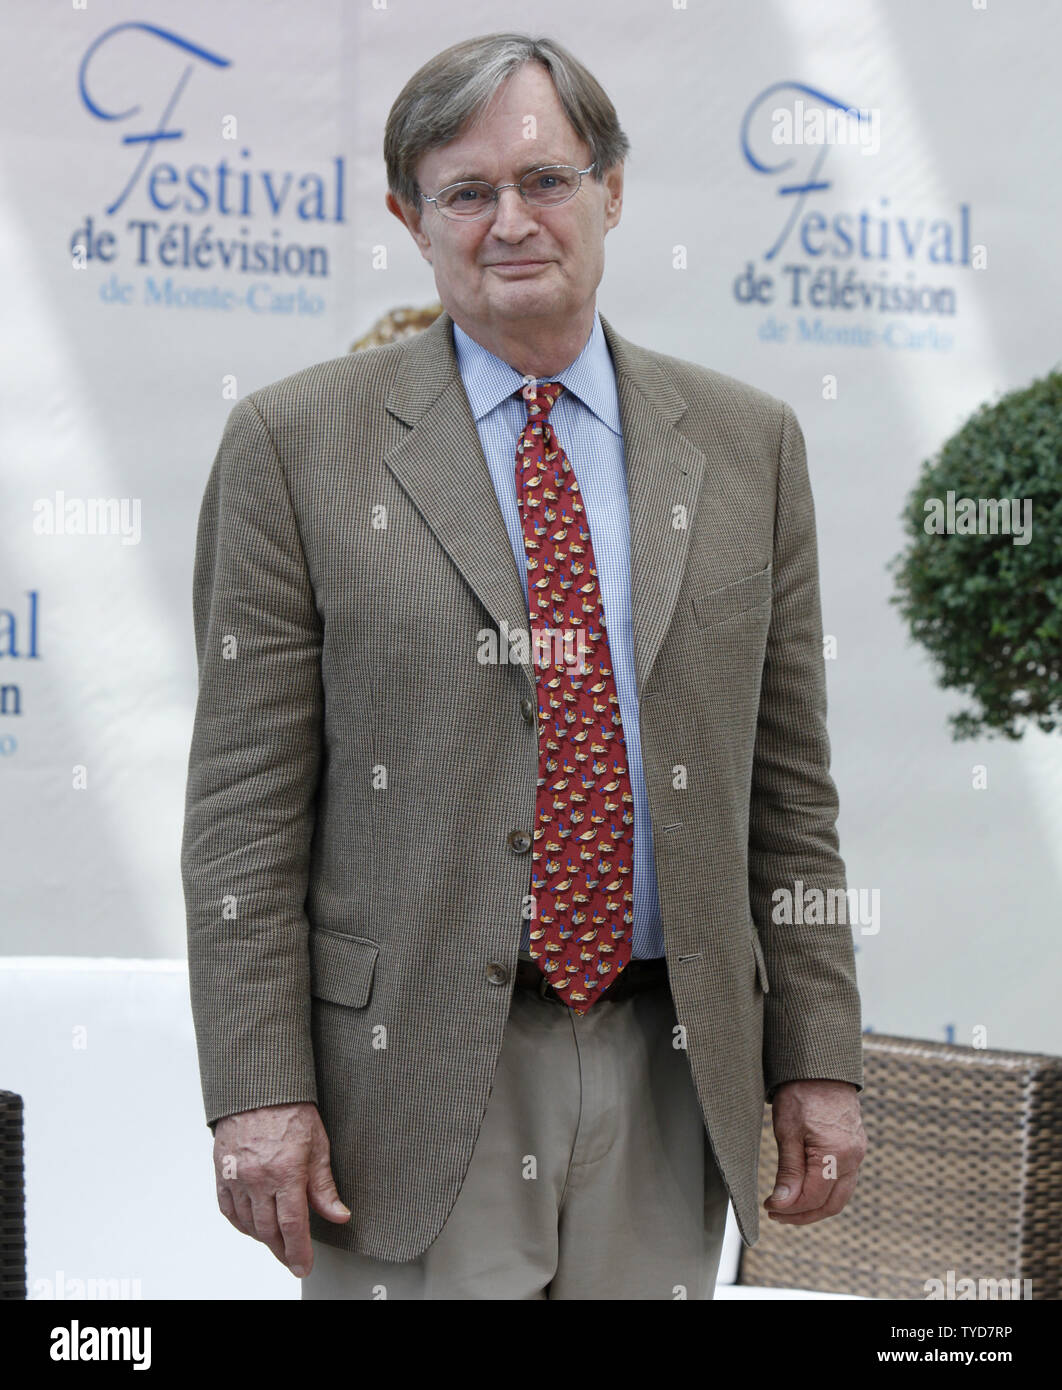 Actor David McCallum arrives at a photocall for the television show 'Navy NCIS: Naval Criminal Investigative Service' during the 49th Monte Carlo Television Festival in Monte Carlo, Monaco on June 10, 2009.  (UPI Photo/David Silpa) Stock Photo